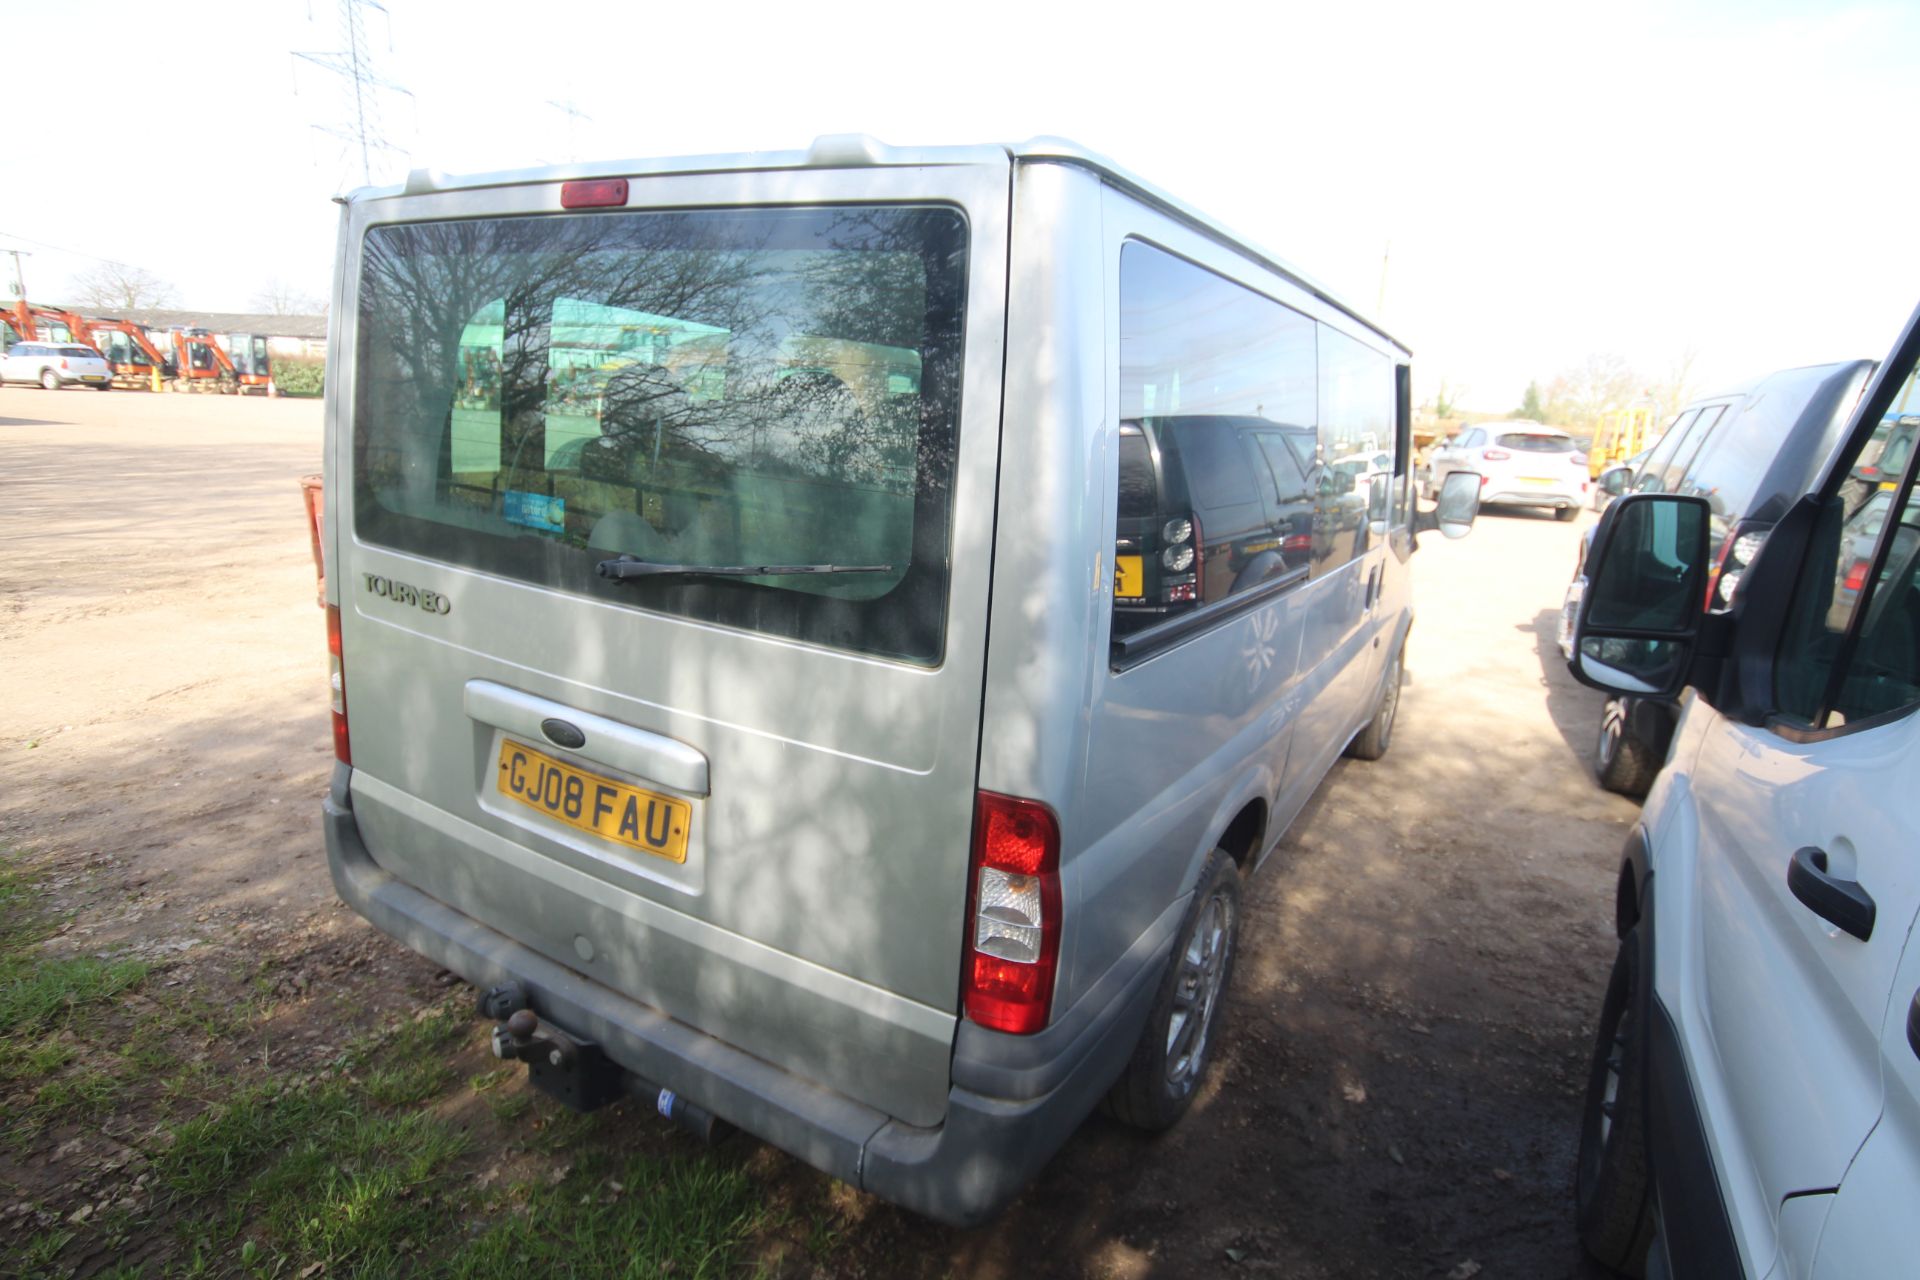 Ford Transit Tourneo 8 seater minibus. Registration GJ08 FAU. Date of first registration 18/03/2008. - Image 2 of 54